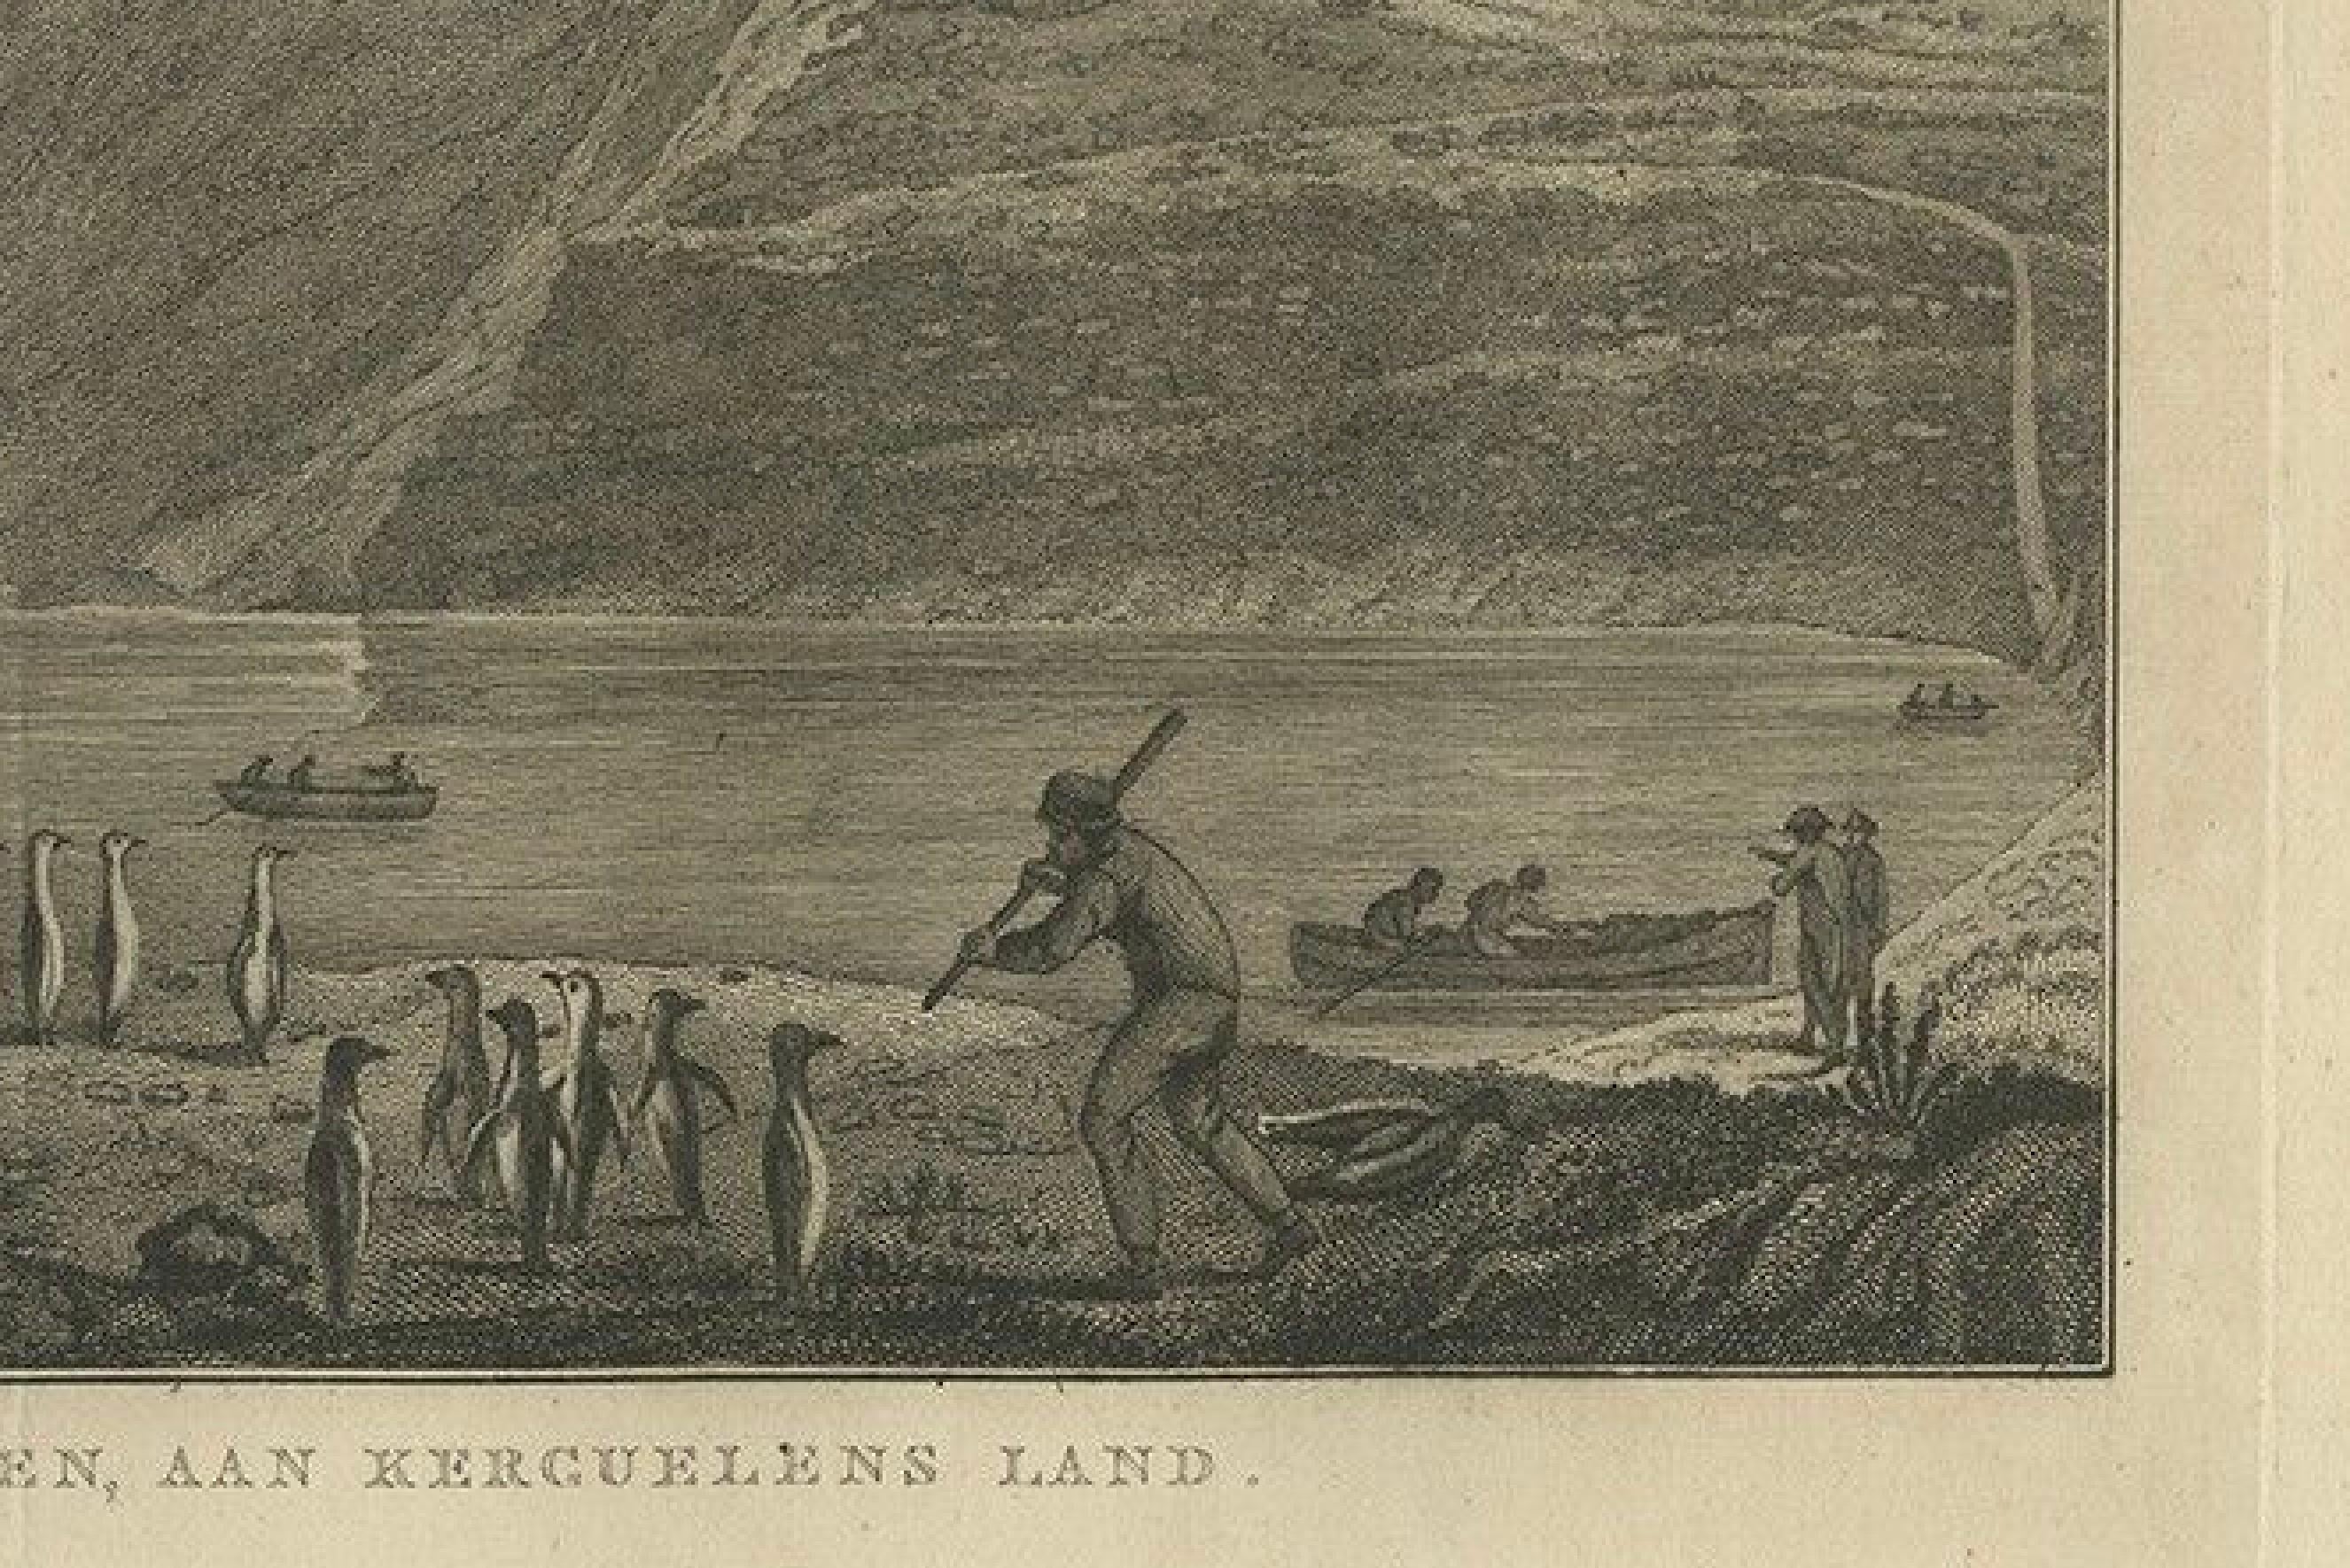 Antique Print of The Kerguelen Islands or the Desolation Islands by Cook, 1803 1